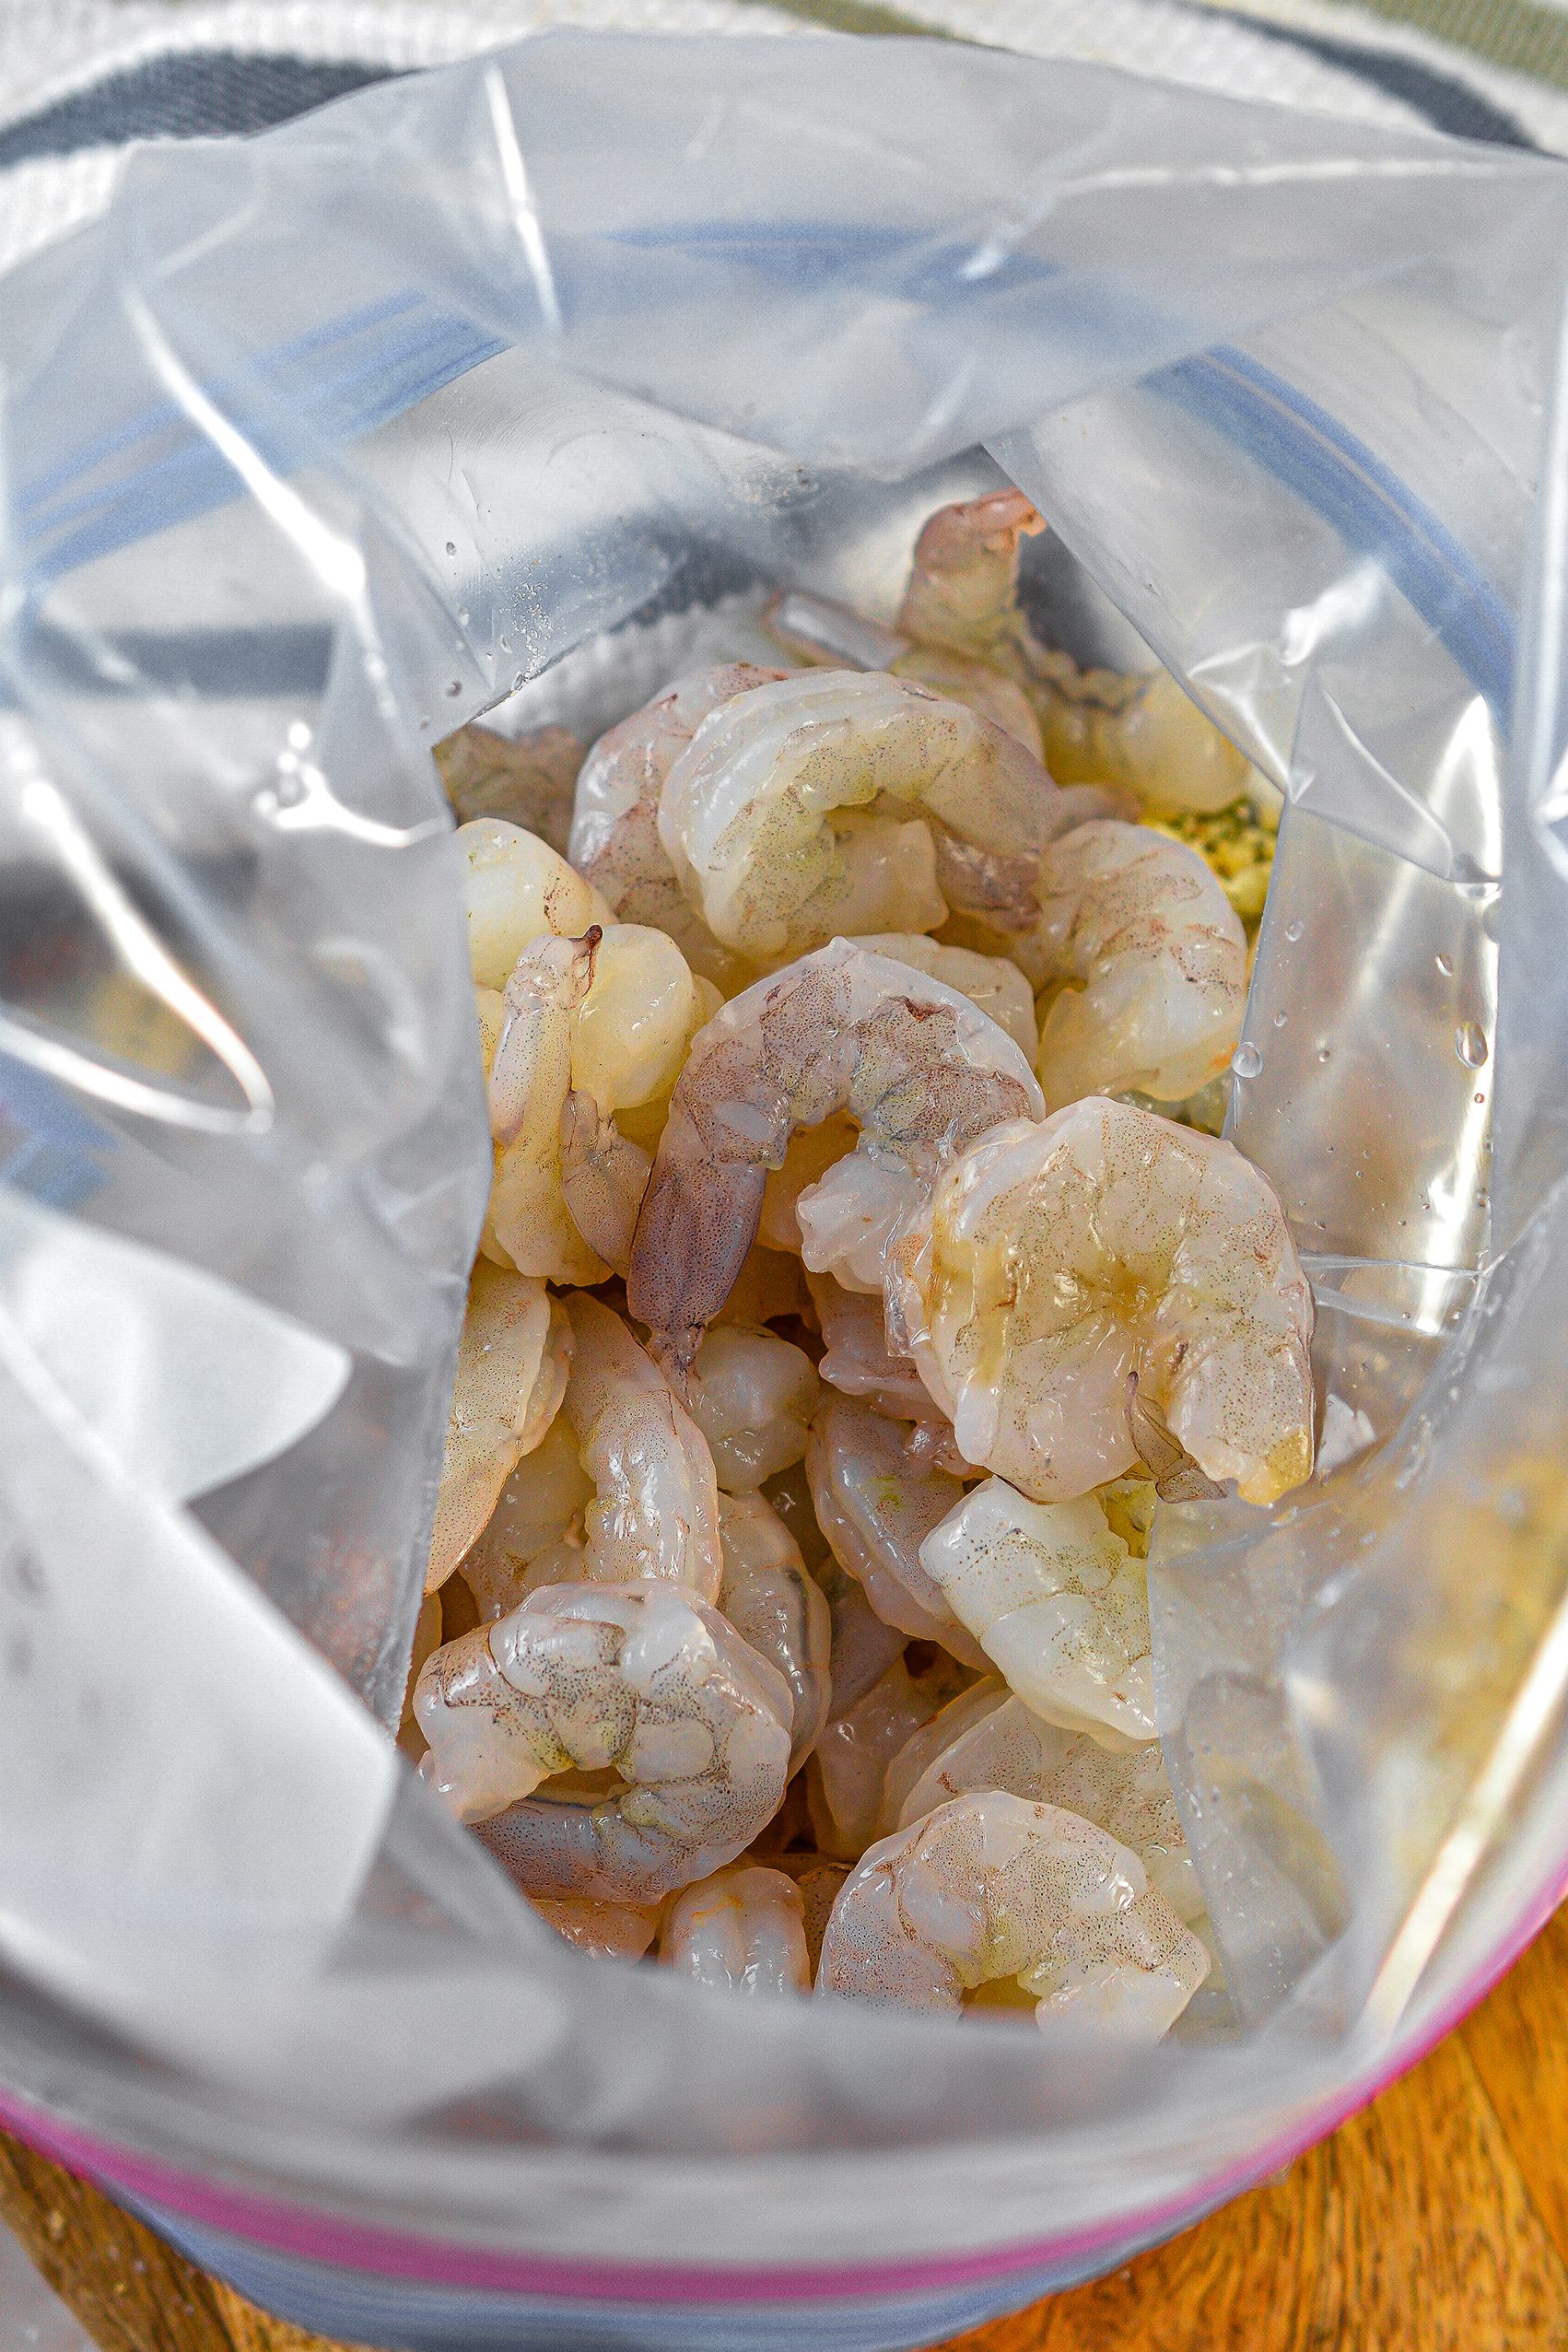 Place the shrimp into the Ziploc bag, and shake to coat in the mixture.